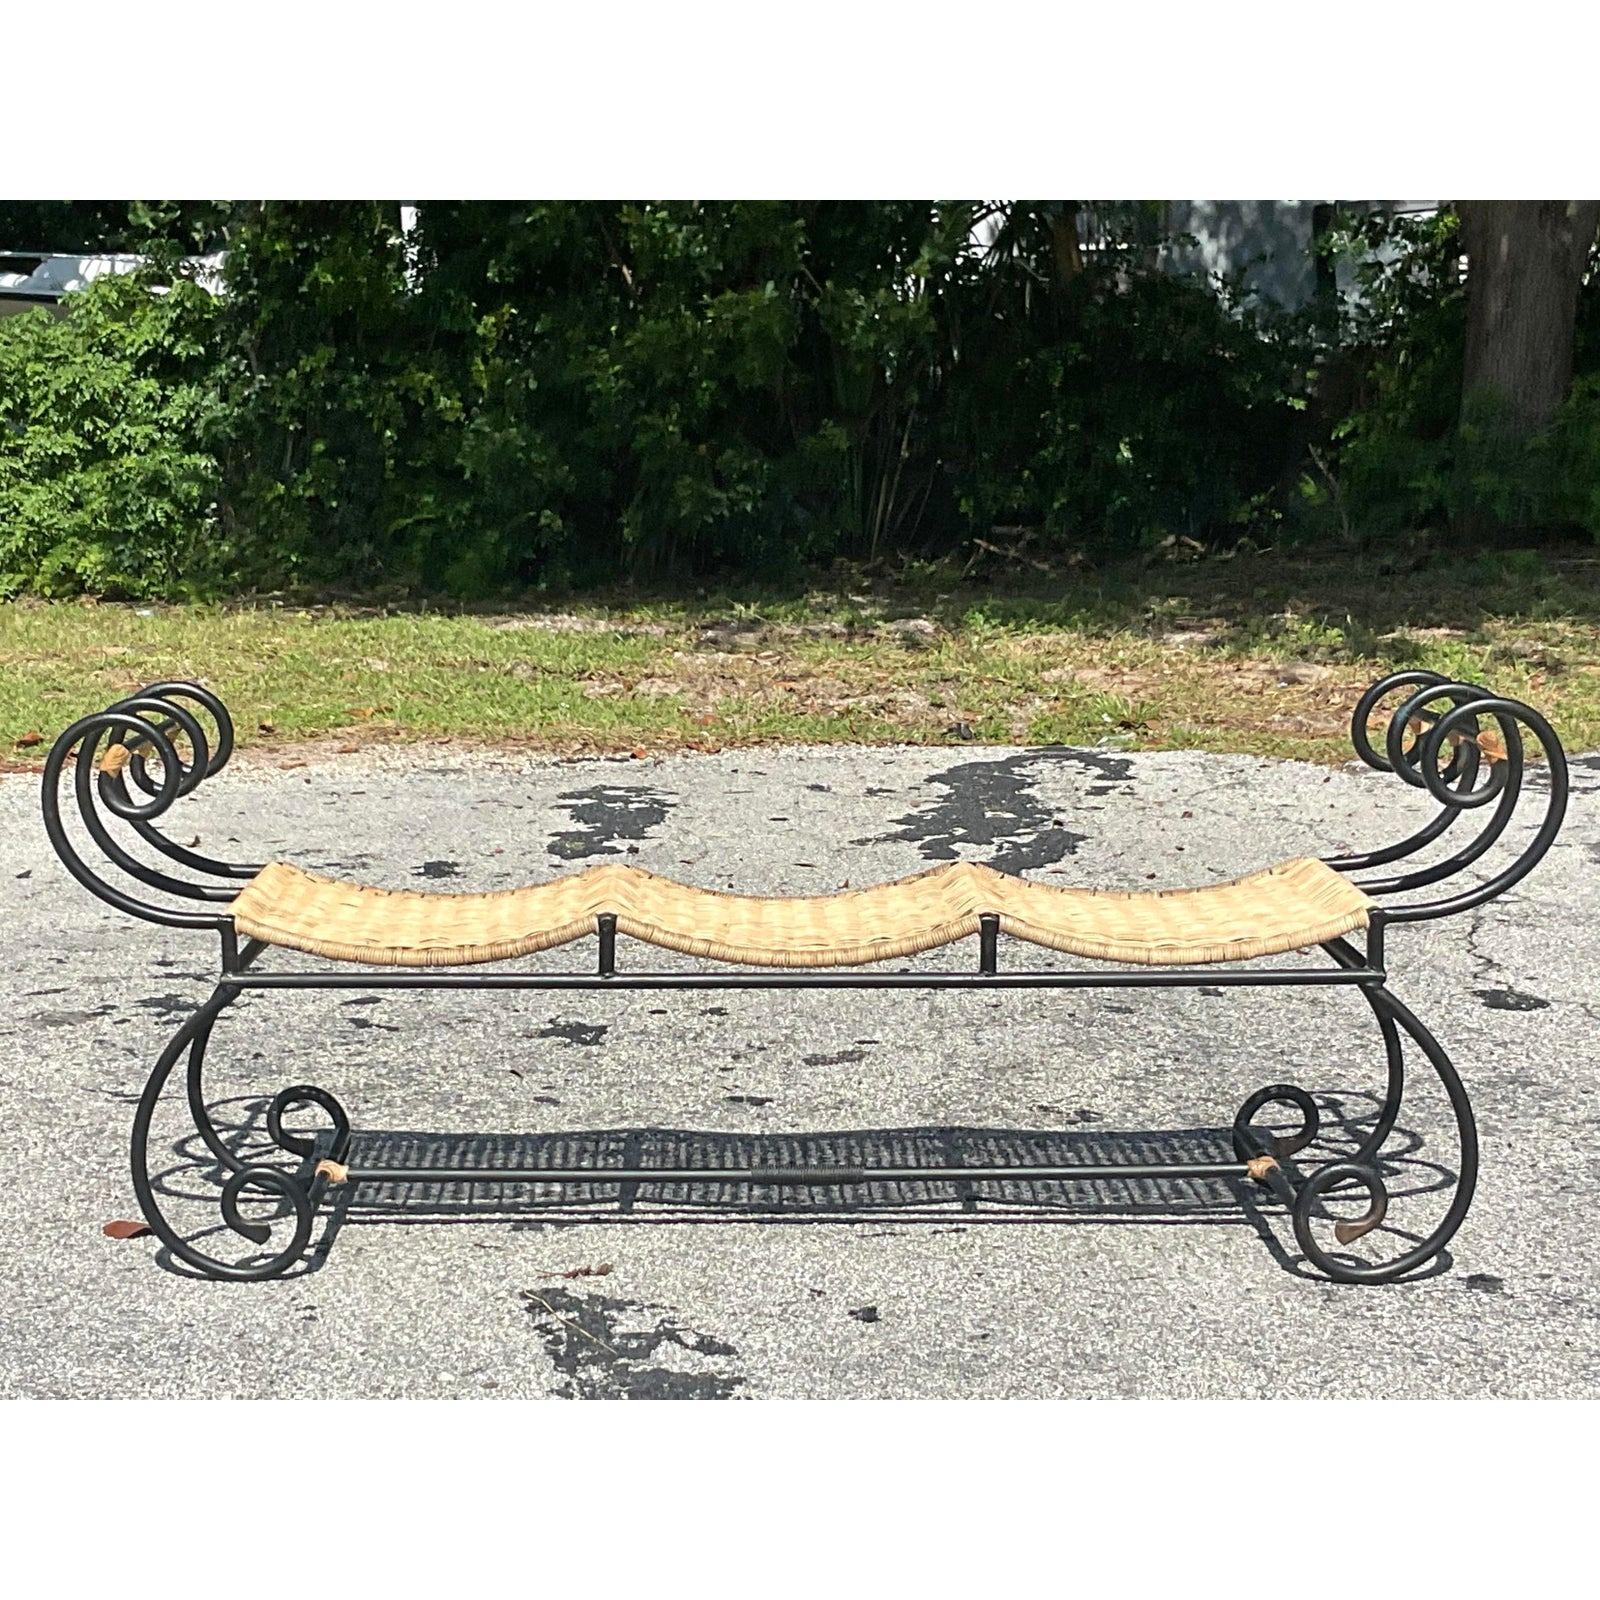 A fabulous vintage Coastal bench. A chic black metal frame with a scalloped design and a woven rattan seat. A real statement piece. Acquired from a Palm Beach estate.